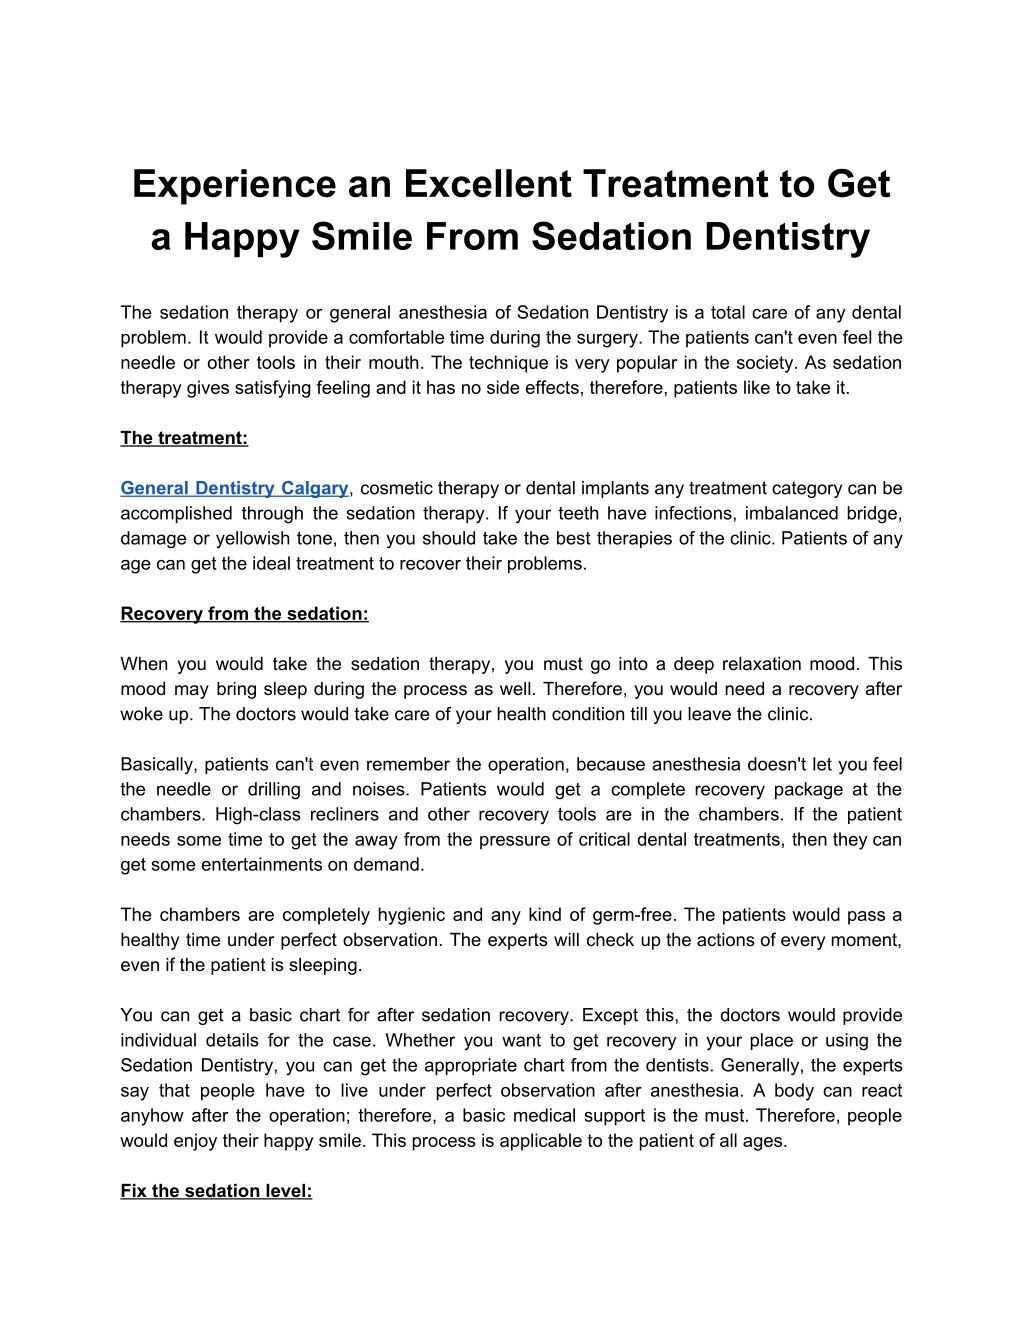 experience an excellent treatment to get a happy